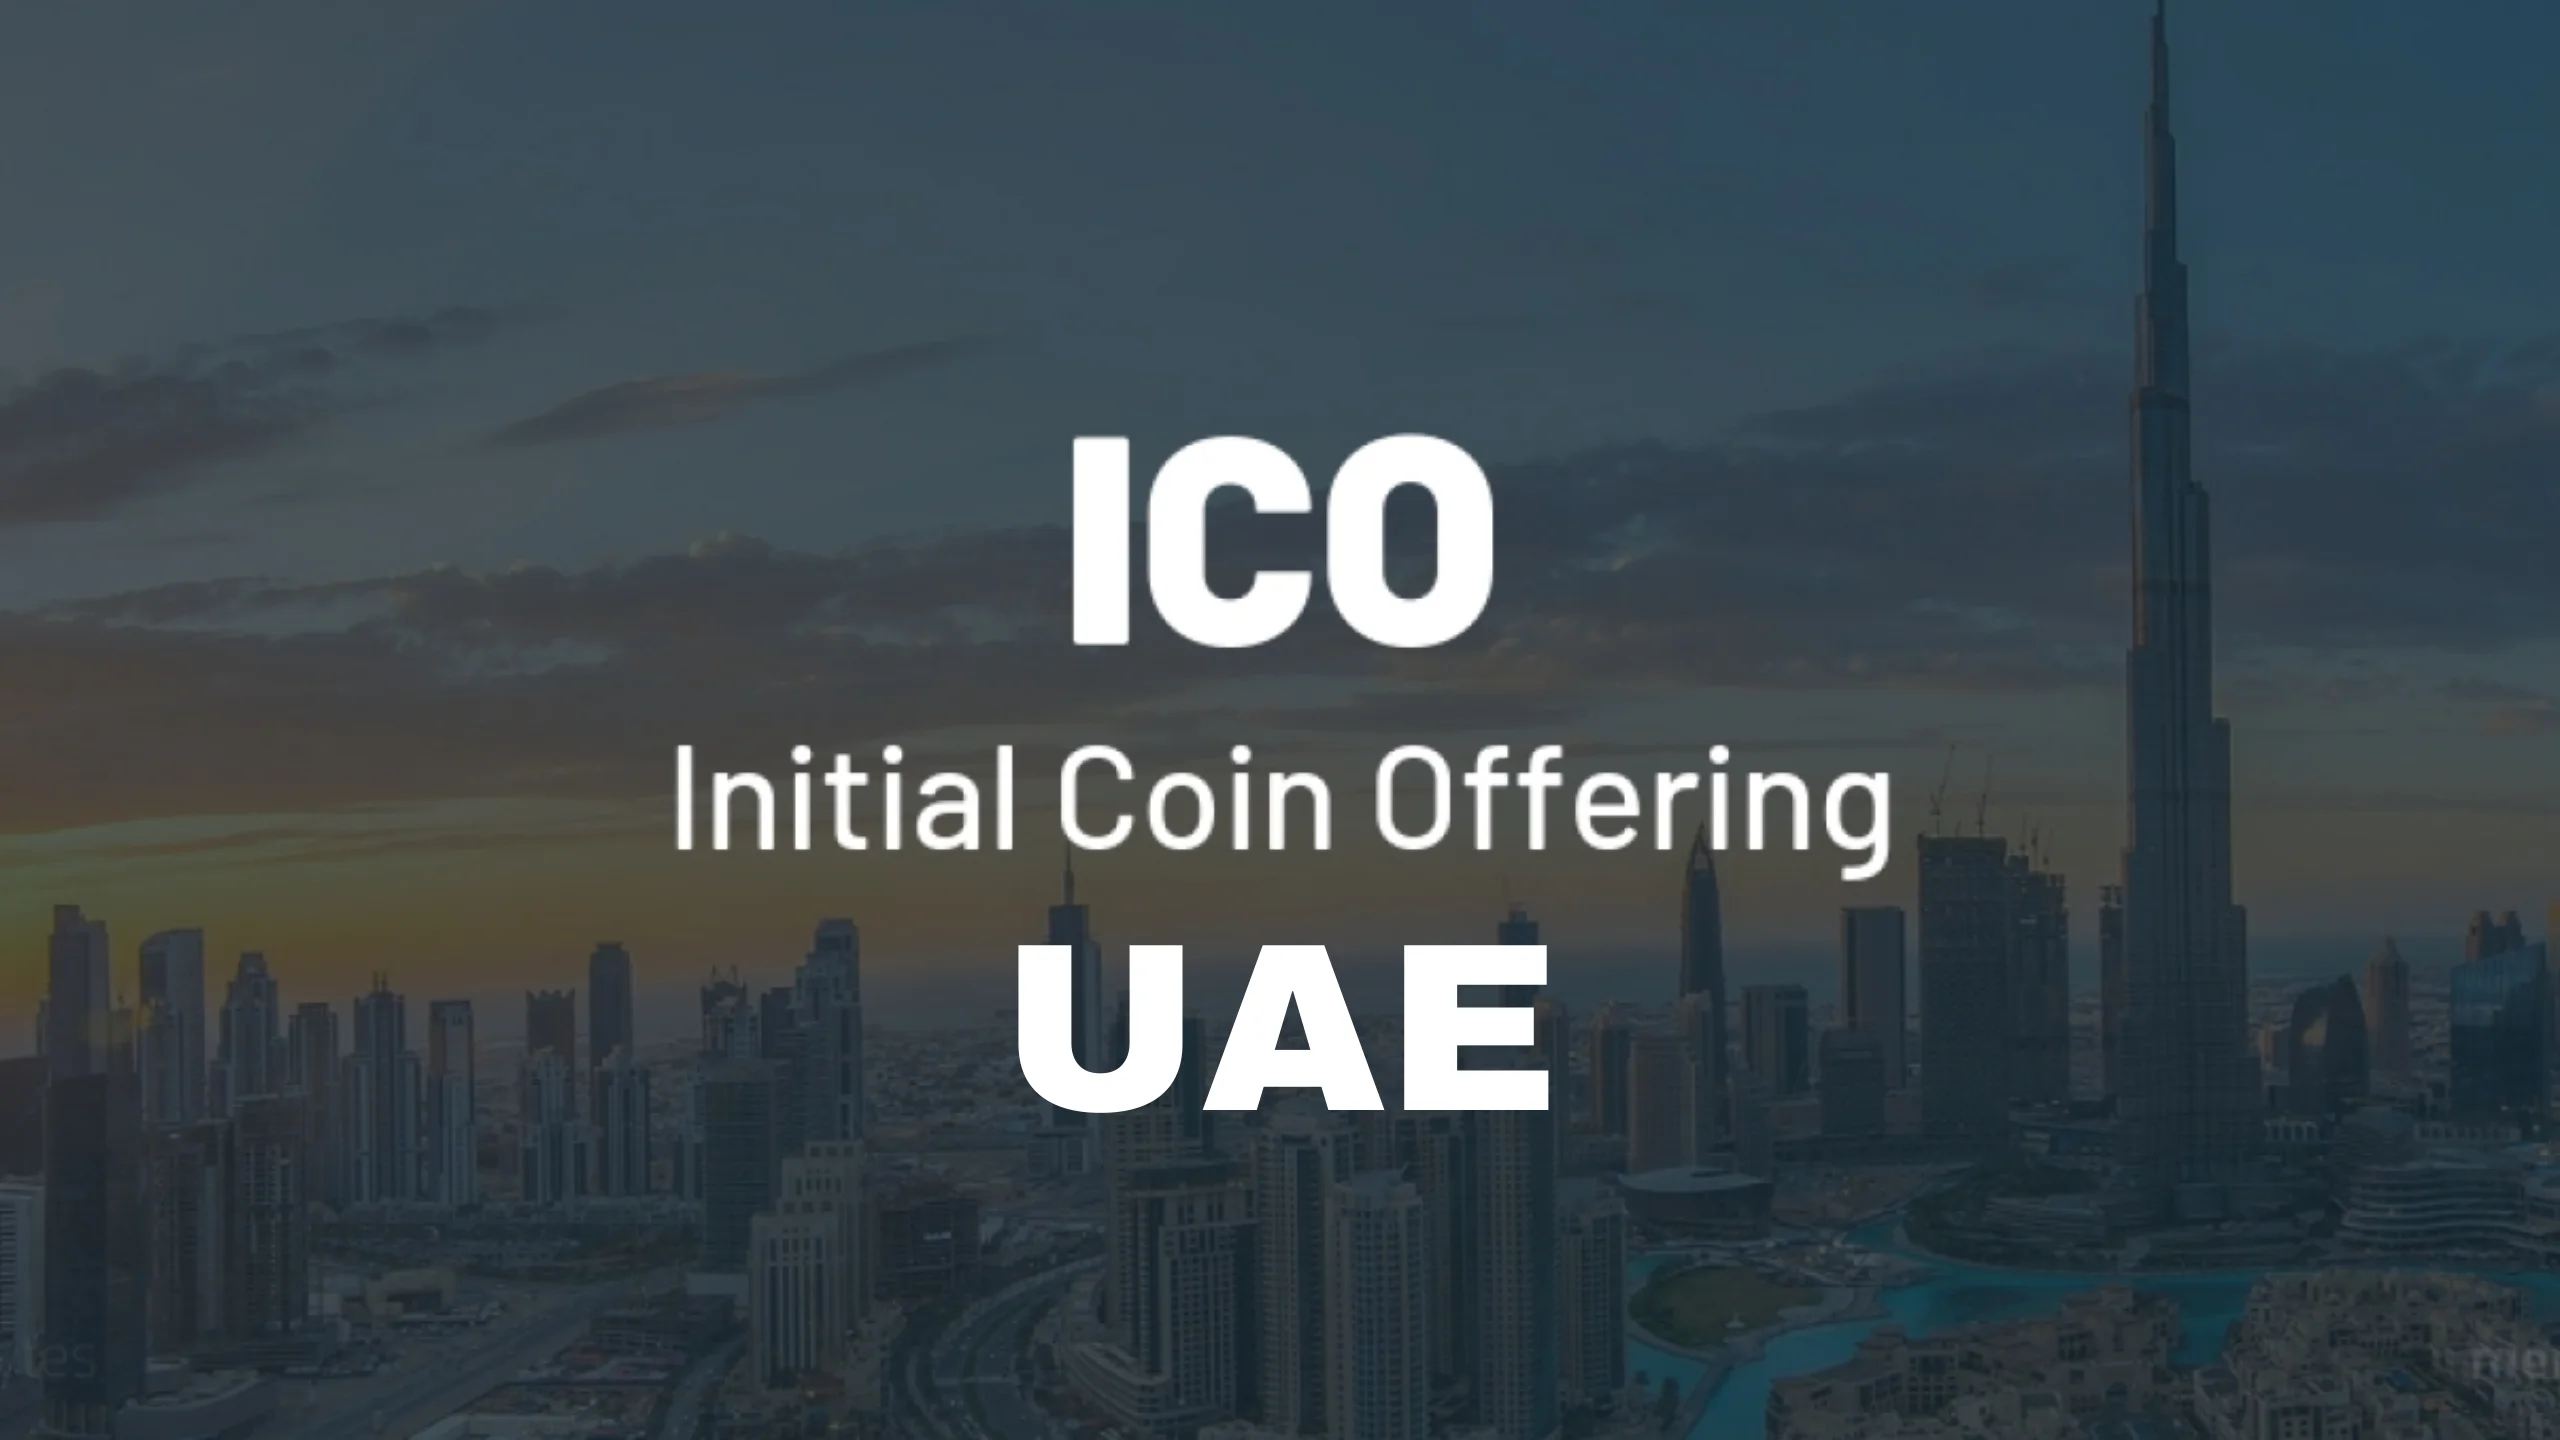 Overview of ICO regulations in the UAE, focusing on legal compliance and guidelines for cryptocurrency projects.